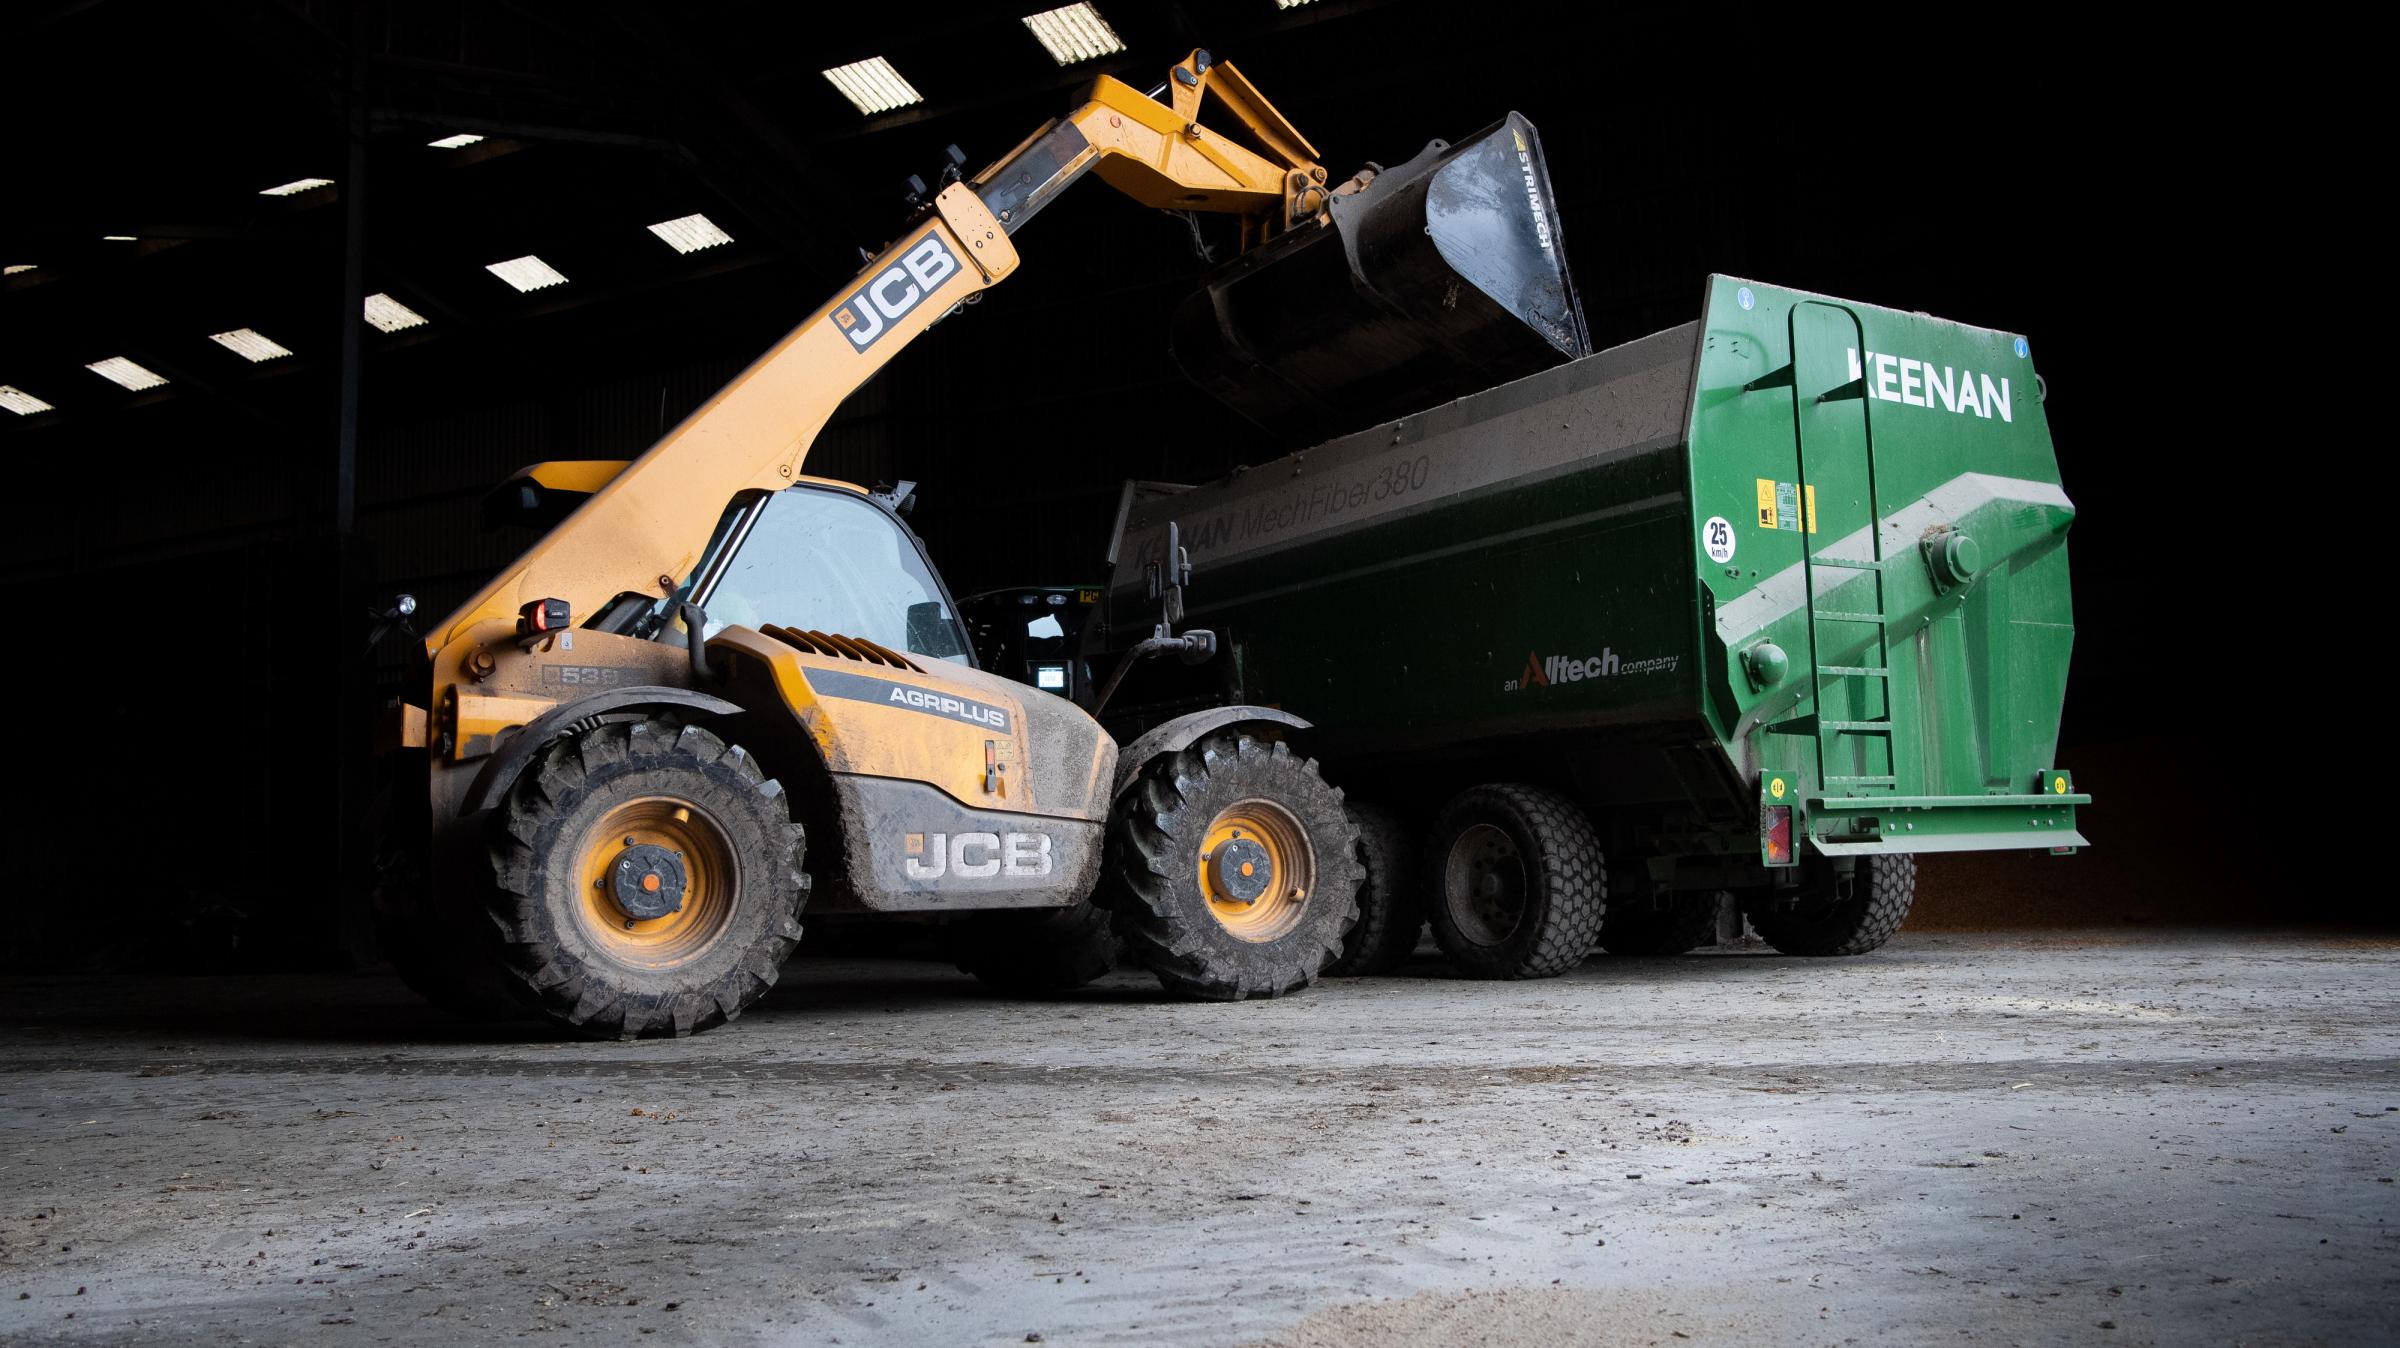 The Keenan feed wagon helps with the consistency of silage ration for the herd Ref:RH030321509 Rob Haining / The Scottish Farmer...